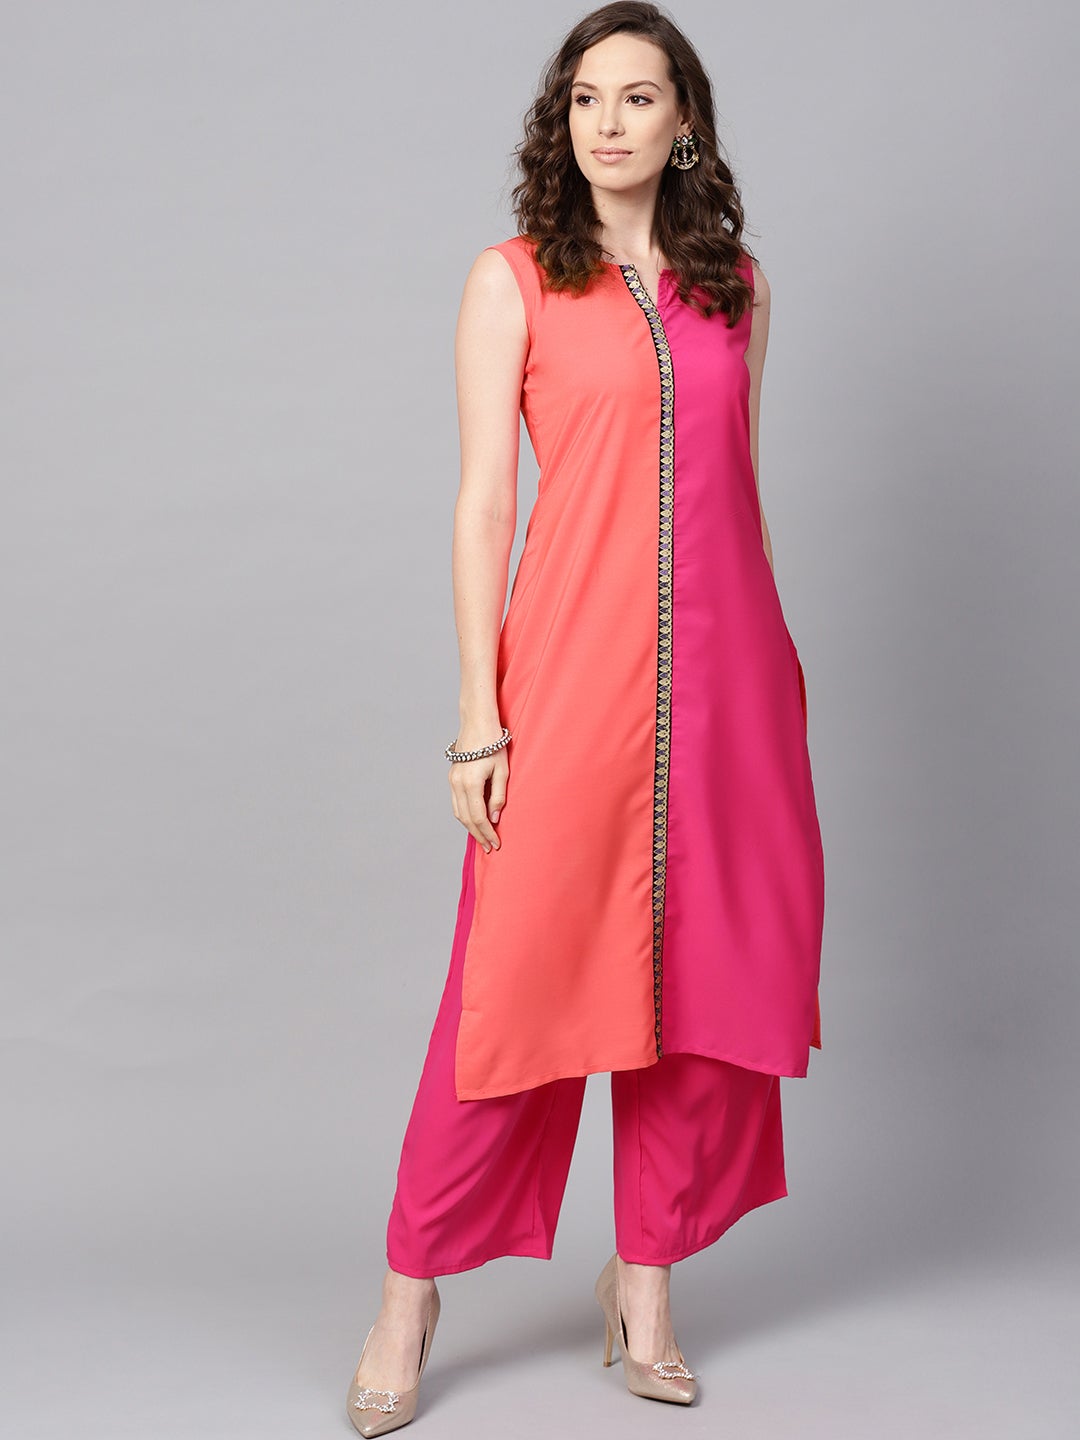 Mindhal Women's Pink Color Solid Straight Crepe Kurta